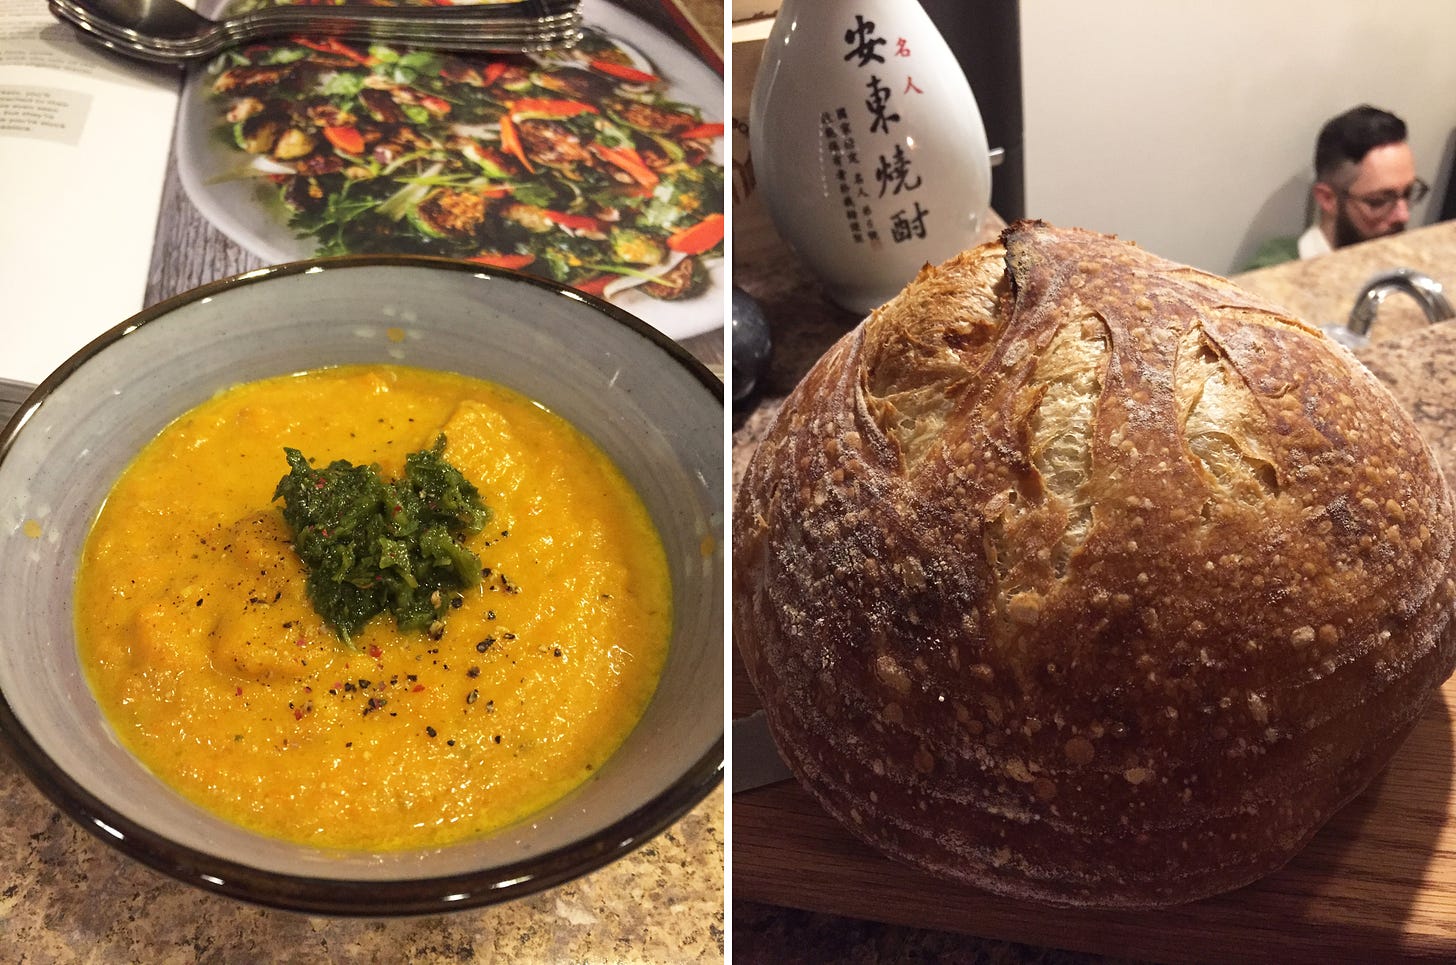 Left image: a small bowl of roasted carrot soup with a spoonful of chimichurri on top. A stack of spoons sits on top of a cookbook in the background. Right image: a crusty loaf of sourdough sits on a bar in front of a sake bottle.